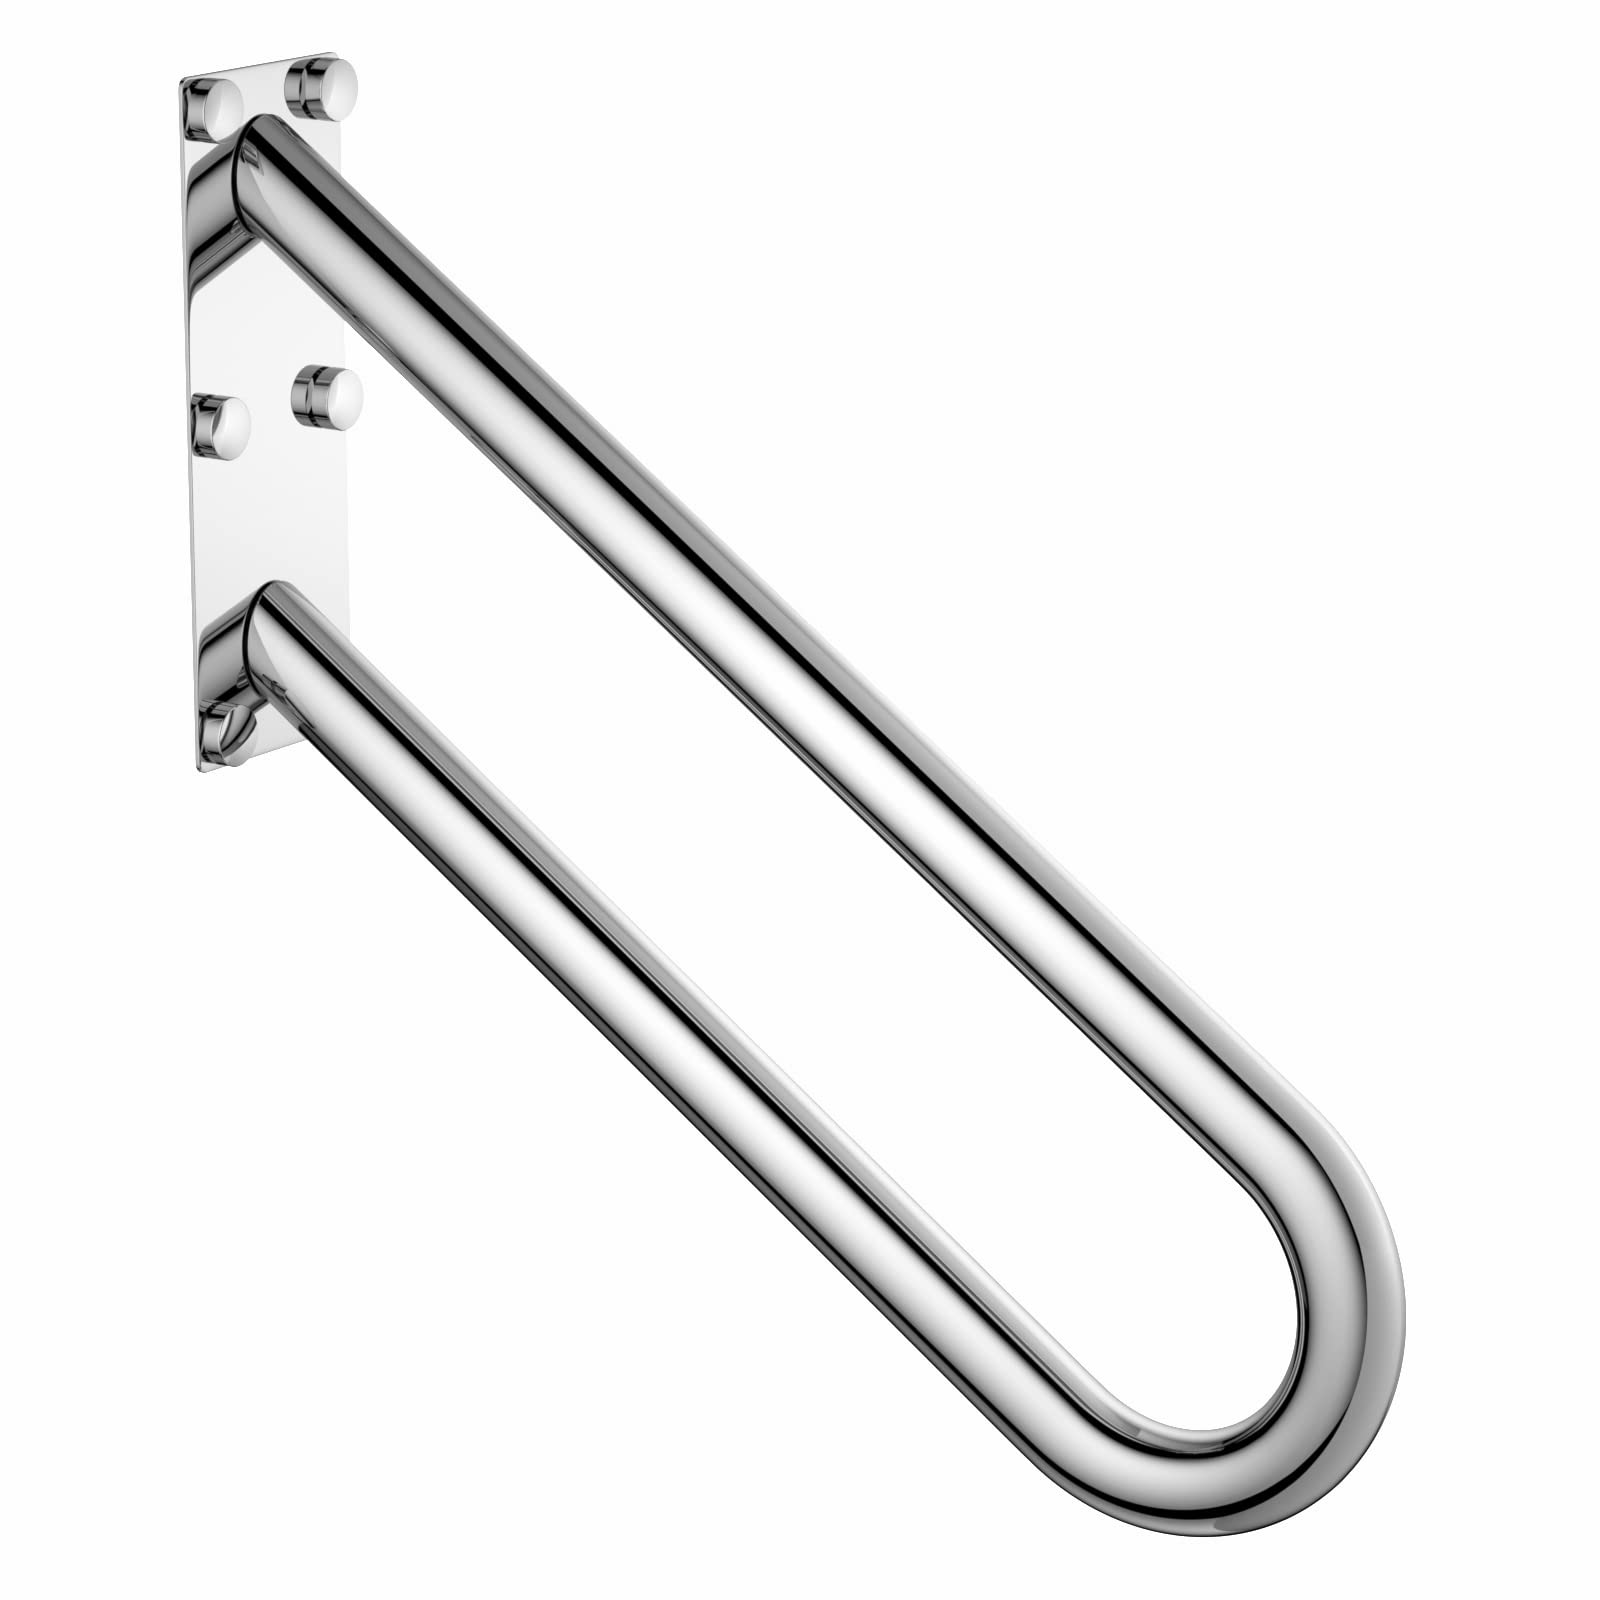 20 inch Stainless Steel Handrail for 1-3 Steps- 1.25